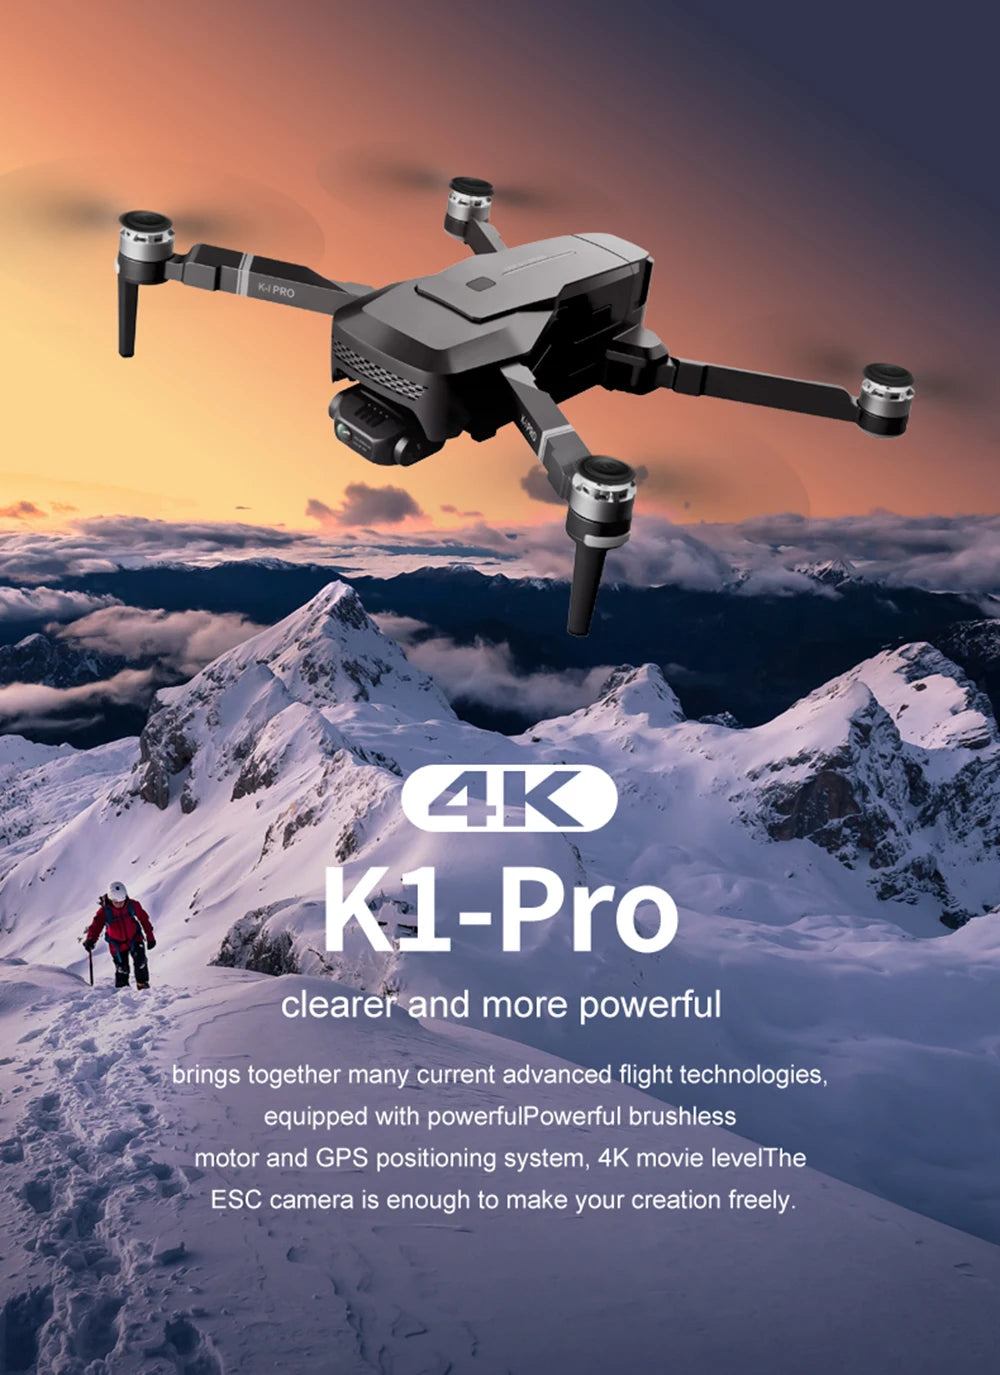 VISUO ZEN K1 PRO Drone, 4K Kl-Pro clearer and more powerful brings together many current advanced flight technologies 